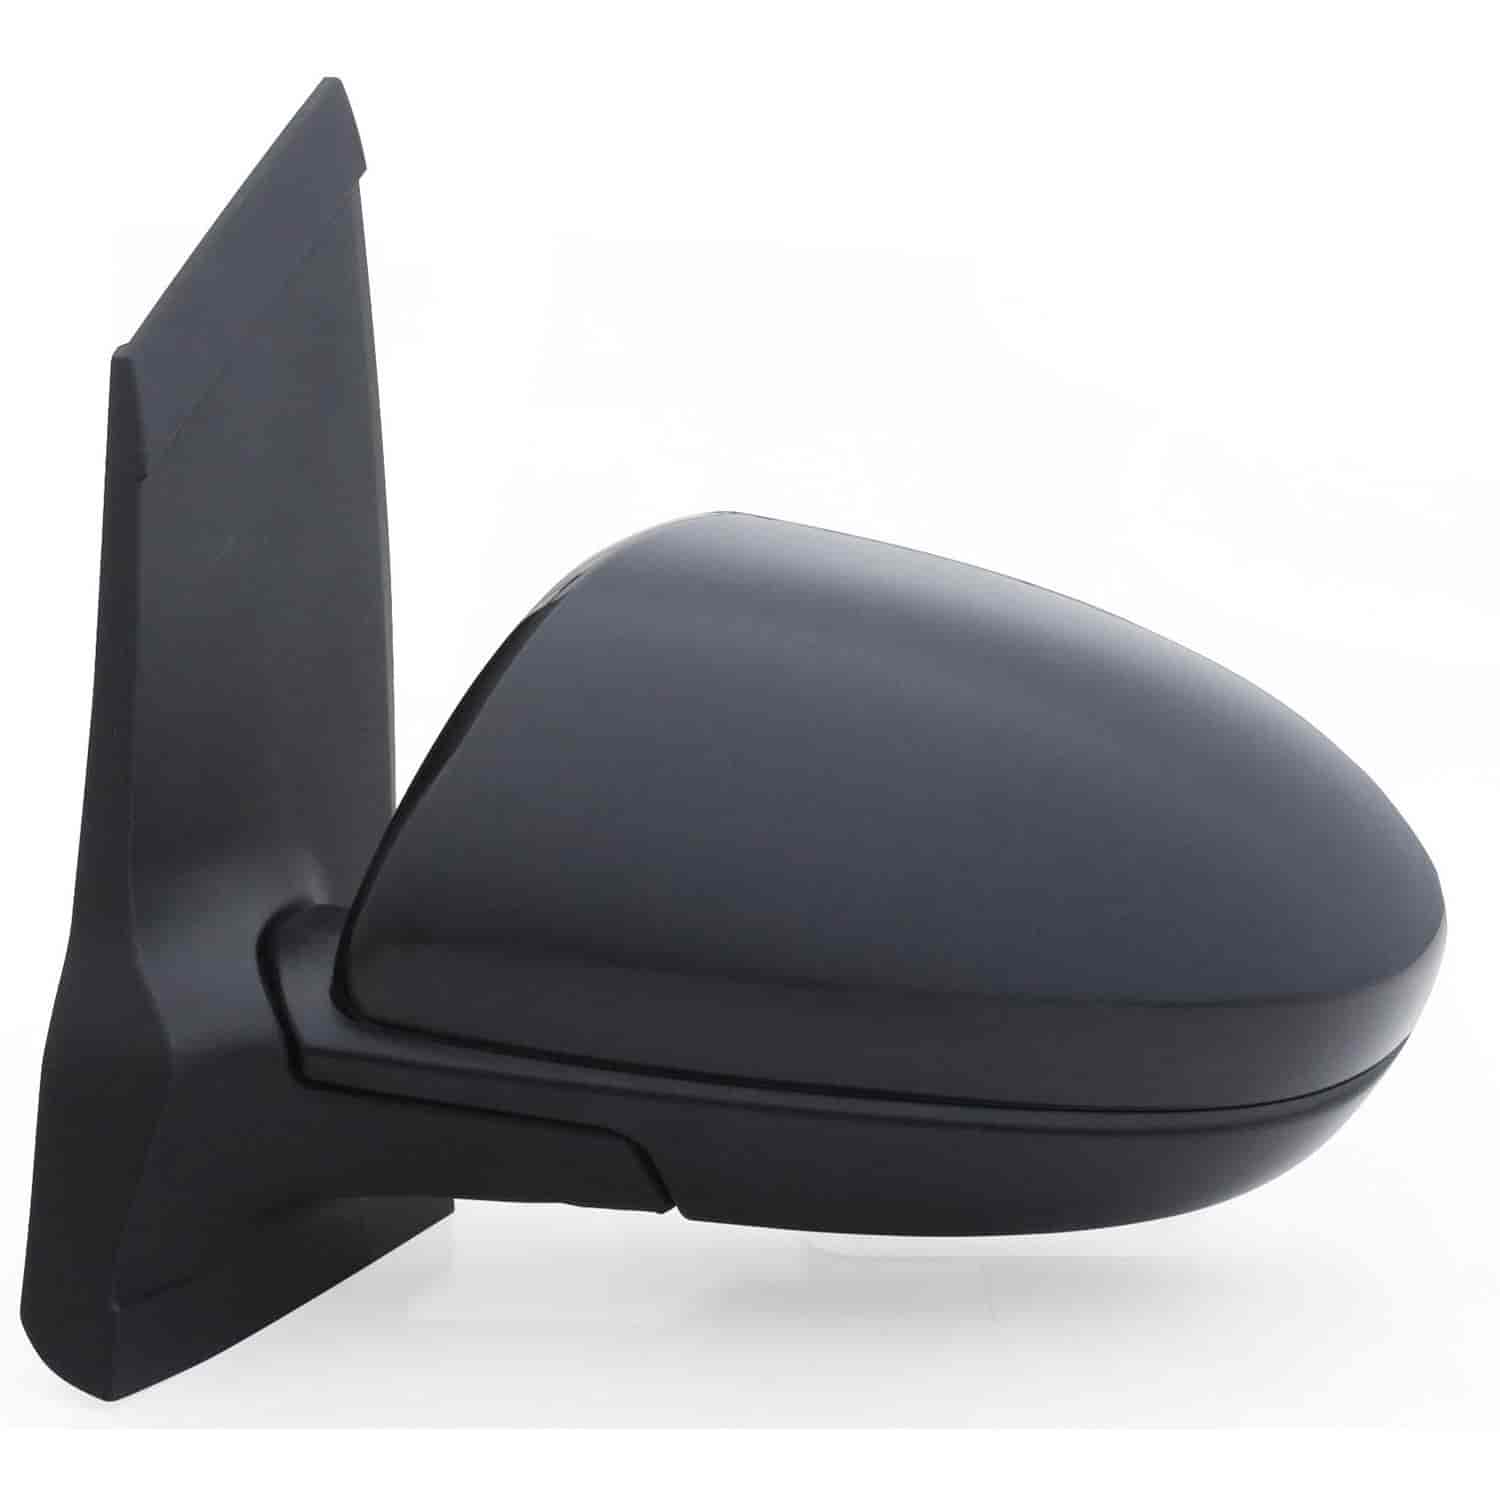 OEM Style Replacement mirror for 11-14 Mazda 2 driver side mirror tested to fit and function like th